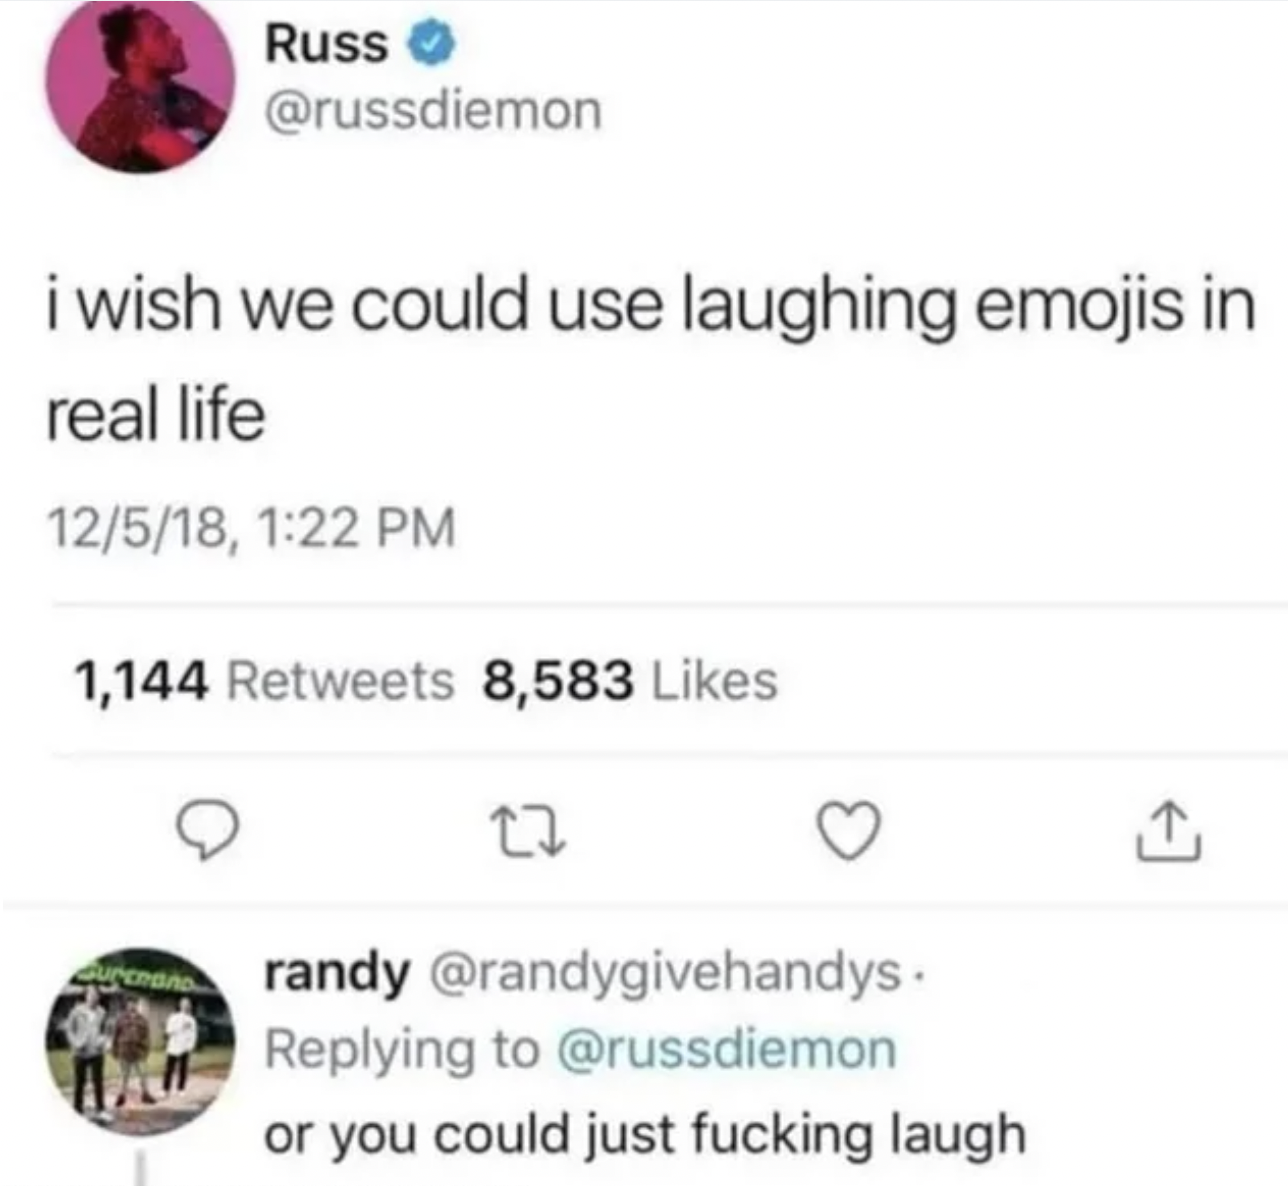 wish we could use laughing emojis - Russ i wish we could use laughing emojis in real life 12518, 1,144 8,583 22 randy . or you could just laugh